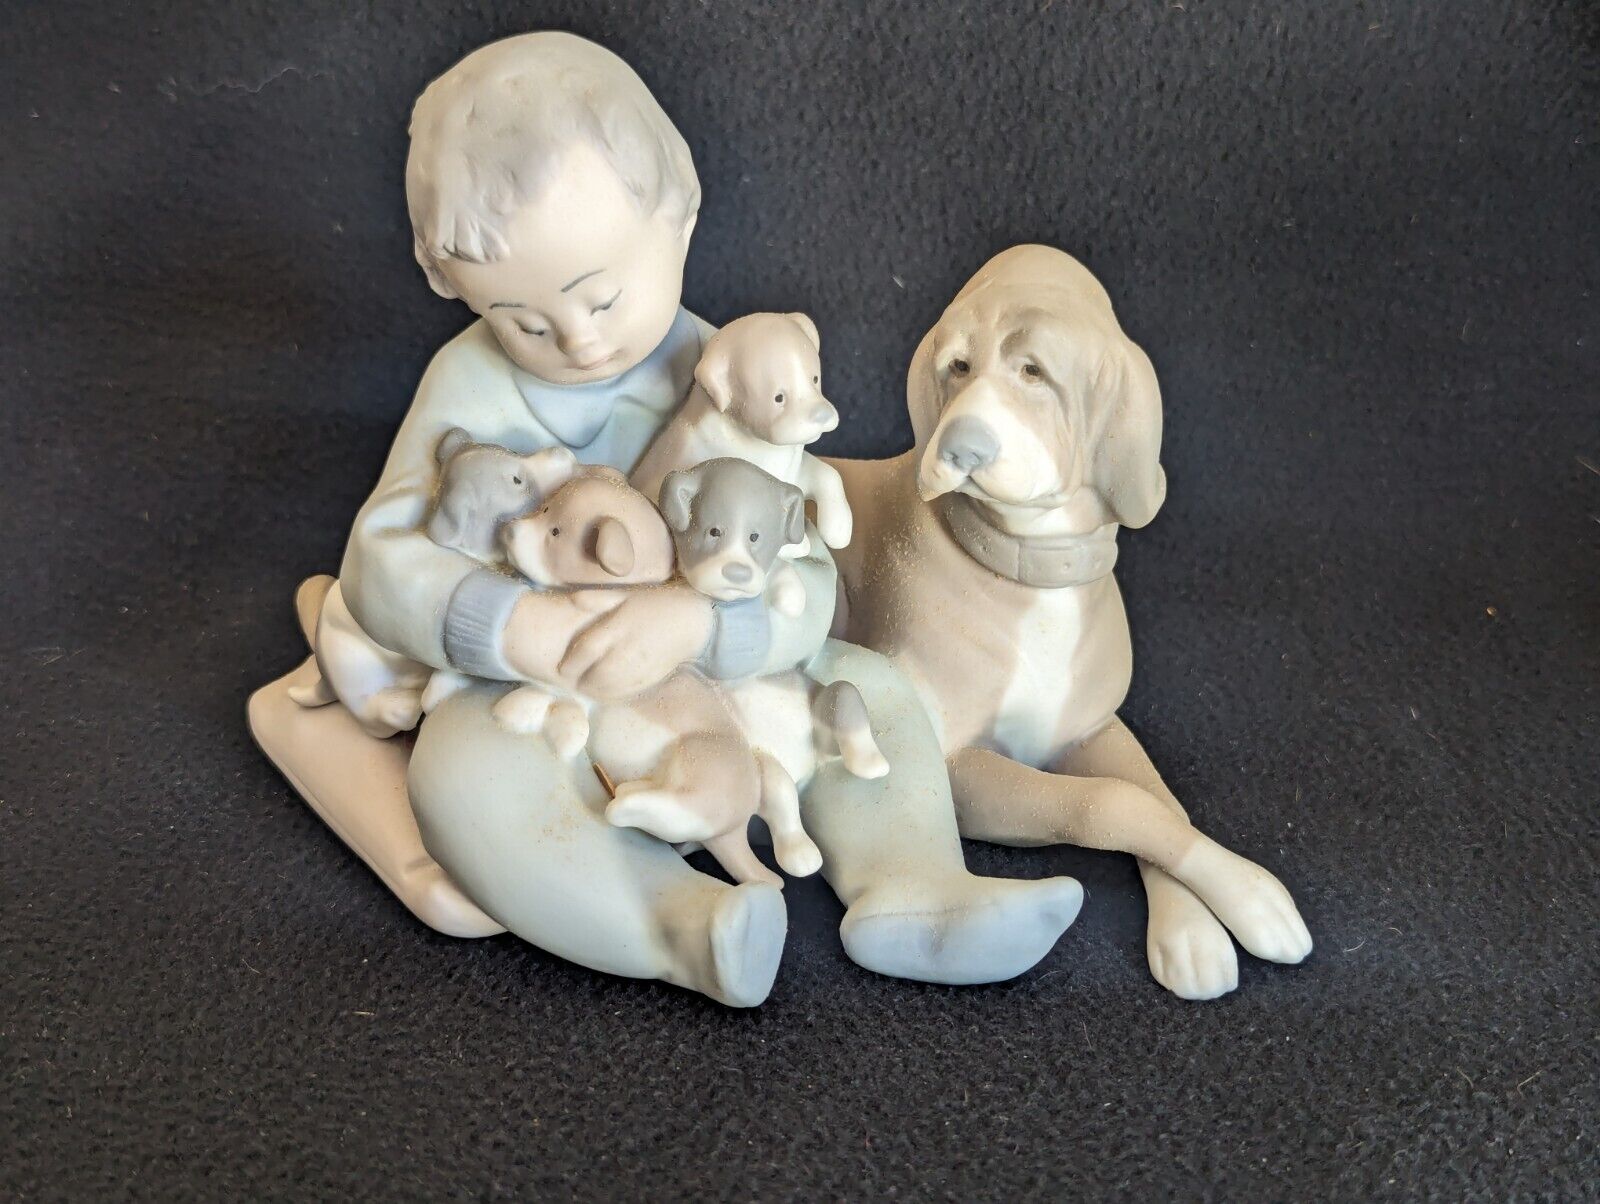 Lladro “New Playmates” # 5456 Boy with Puppies Porcelain Figurine Matte finish